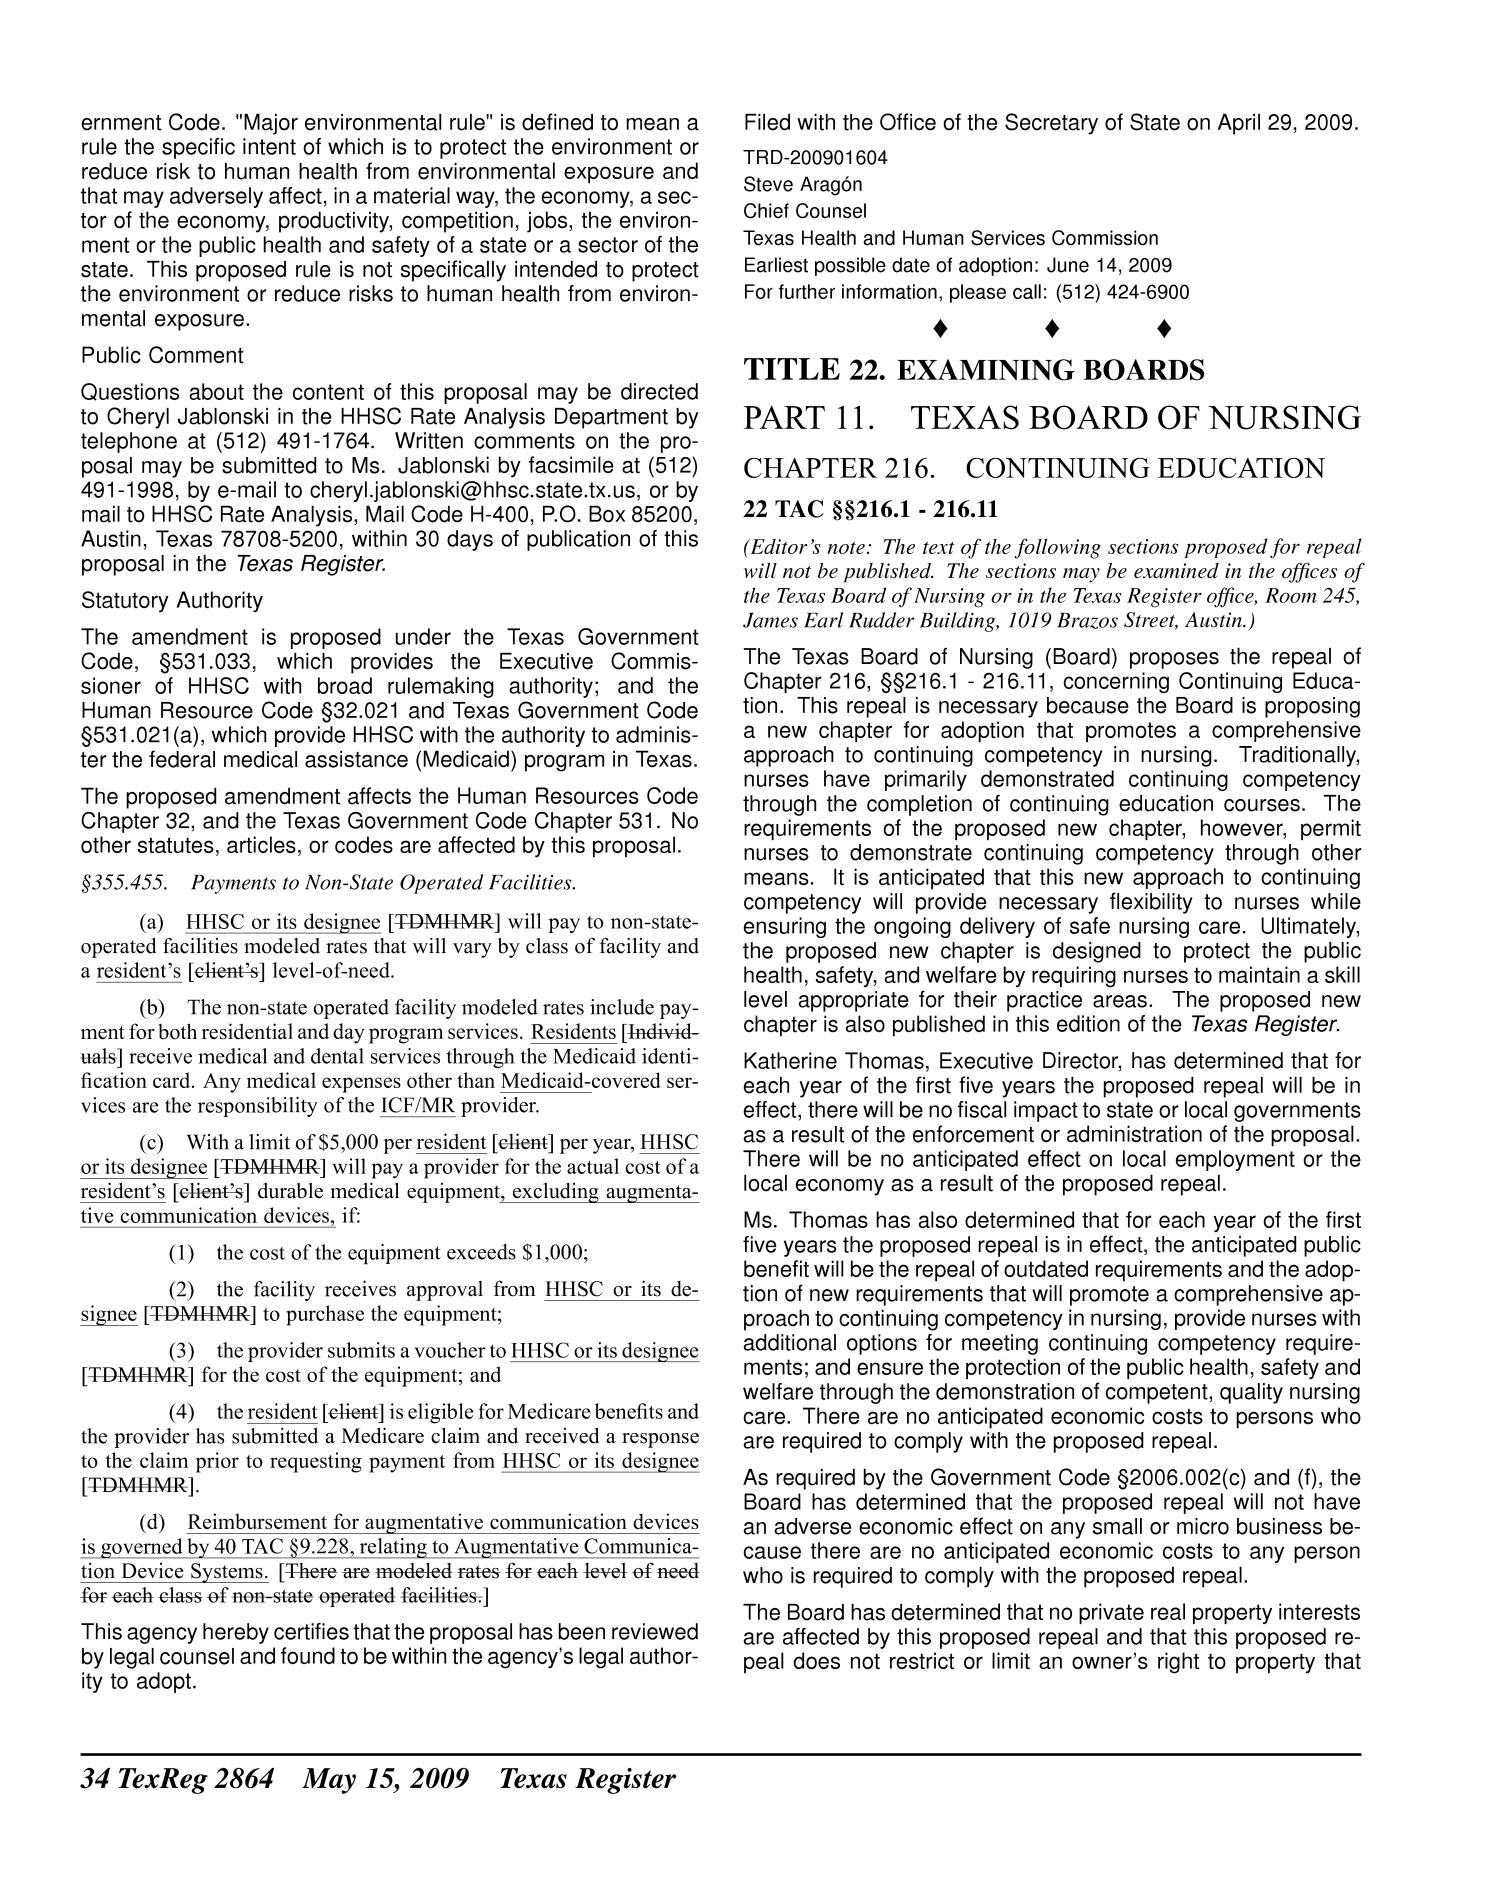 Texas Register, Volume 34, Number 20, Pages 2847-3034, May 15, 2009
                                                
                                                    2864
                                                